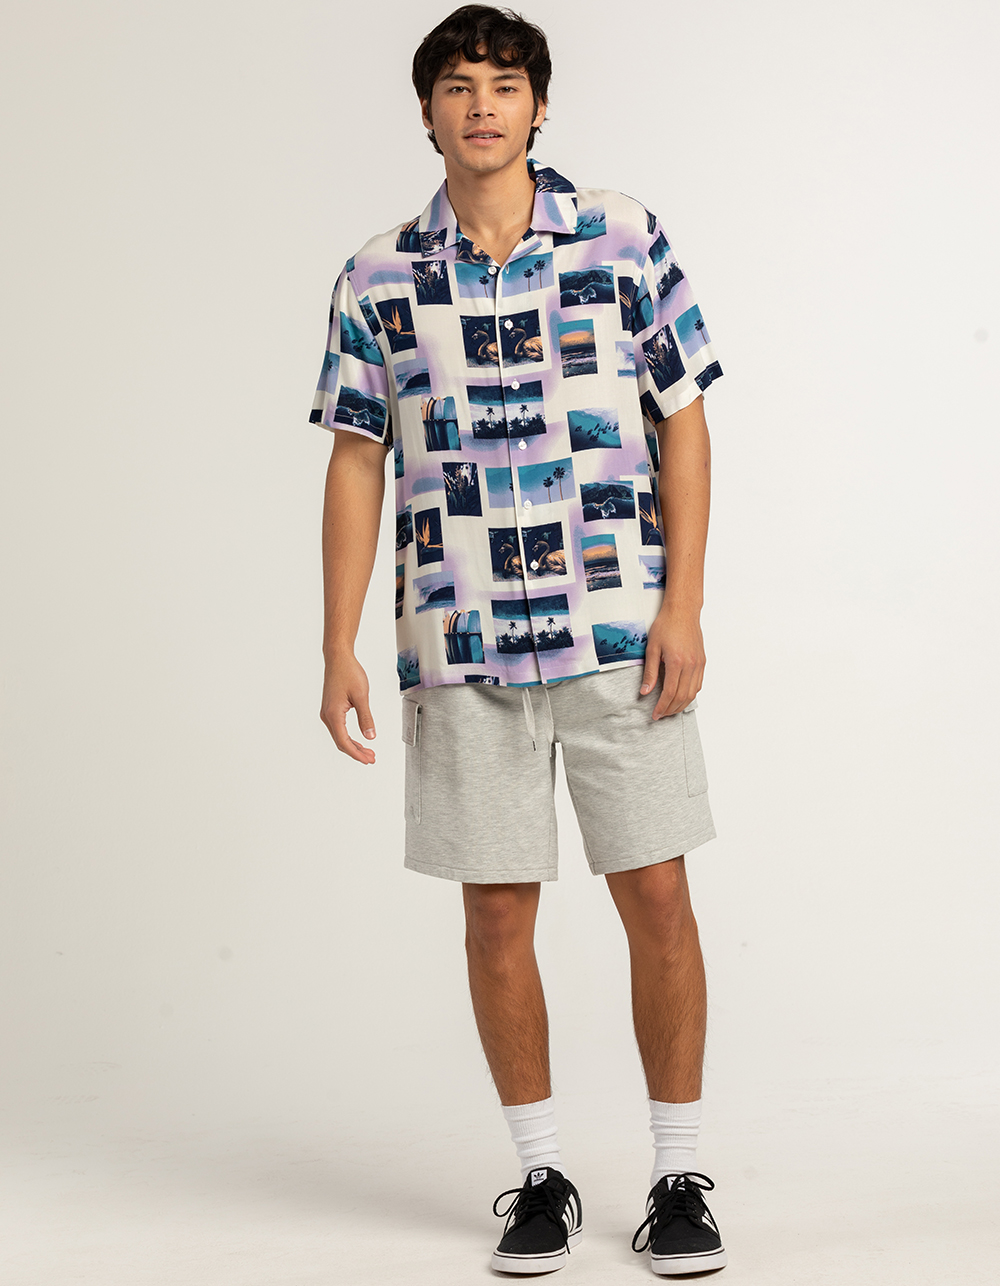 Rsq Photo Reel Button Up Shirt - Multi-Colored - Small